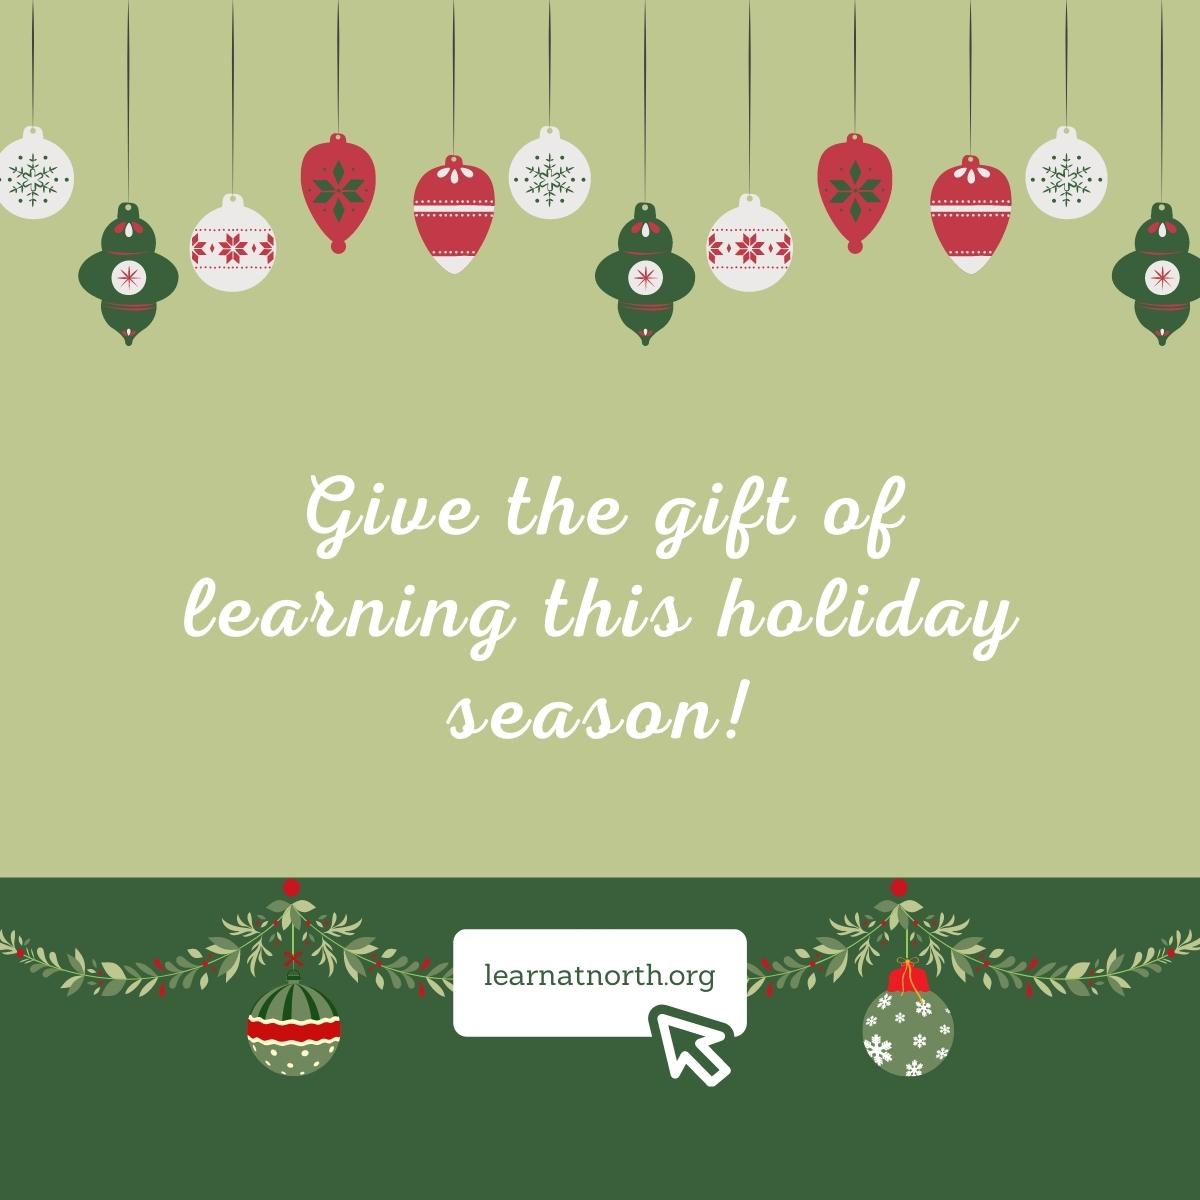 Give the gift of learning!